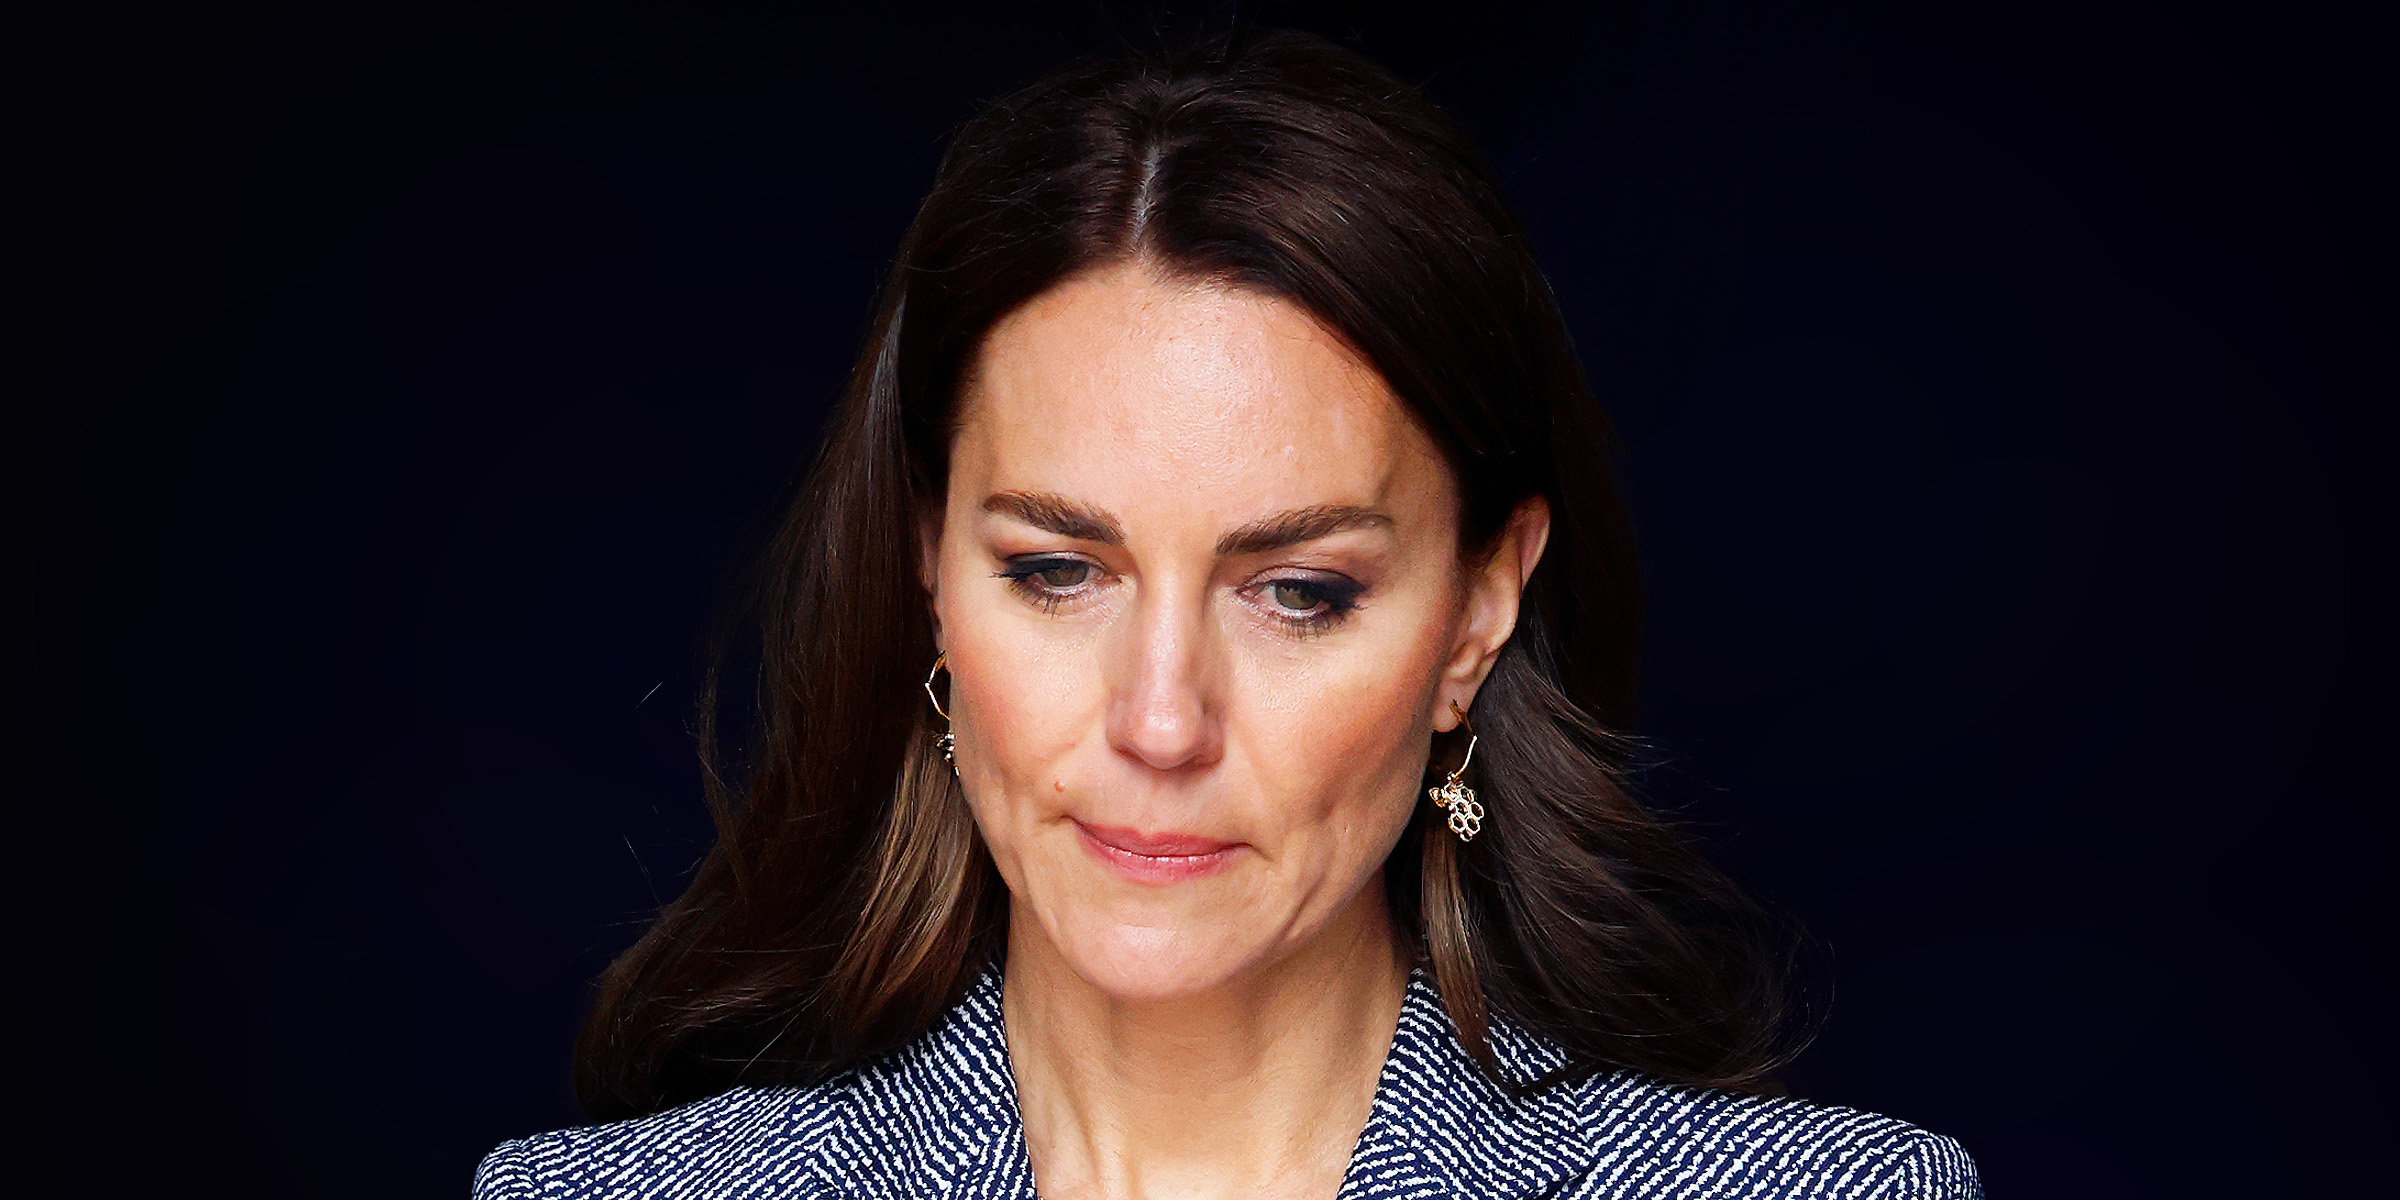 Catherine Middleton, Princess of Wales | Source: Getty Images